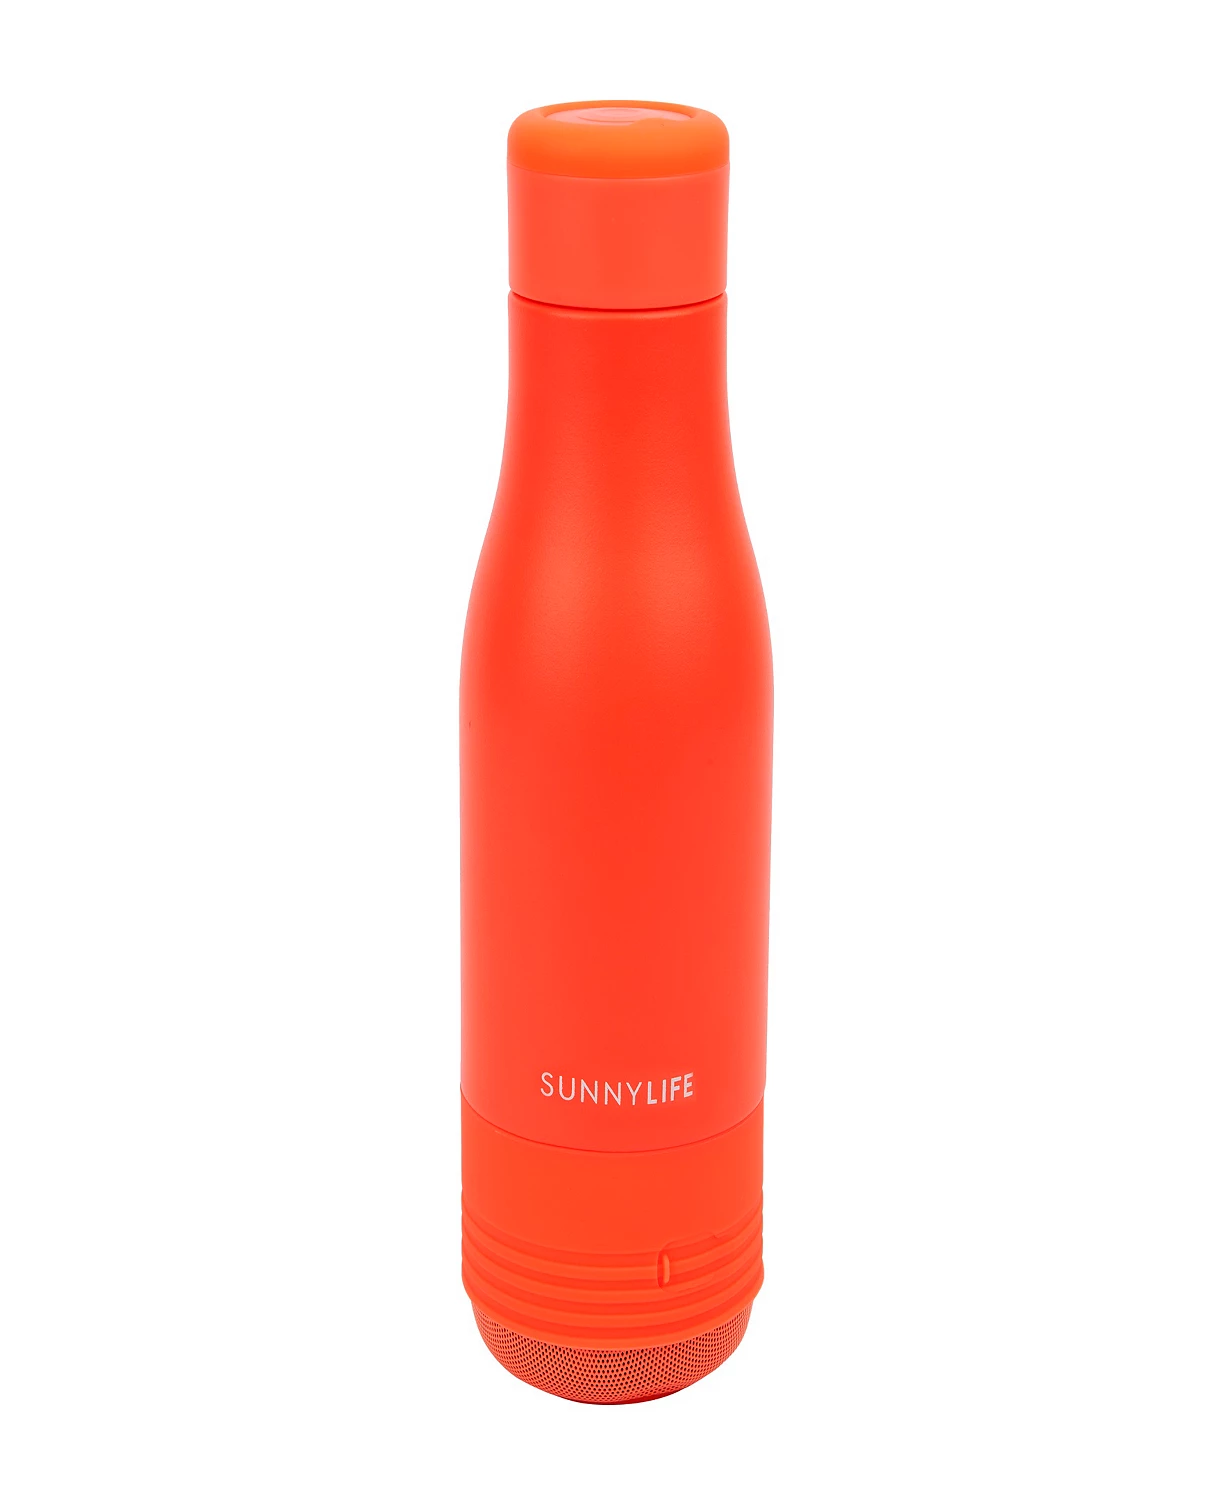 Sunny Life Water Bottle Sounds Major Price Drop at Macy’s!